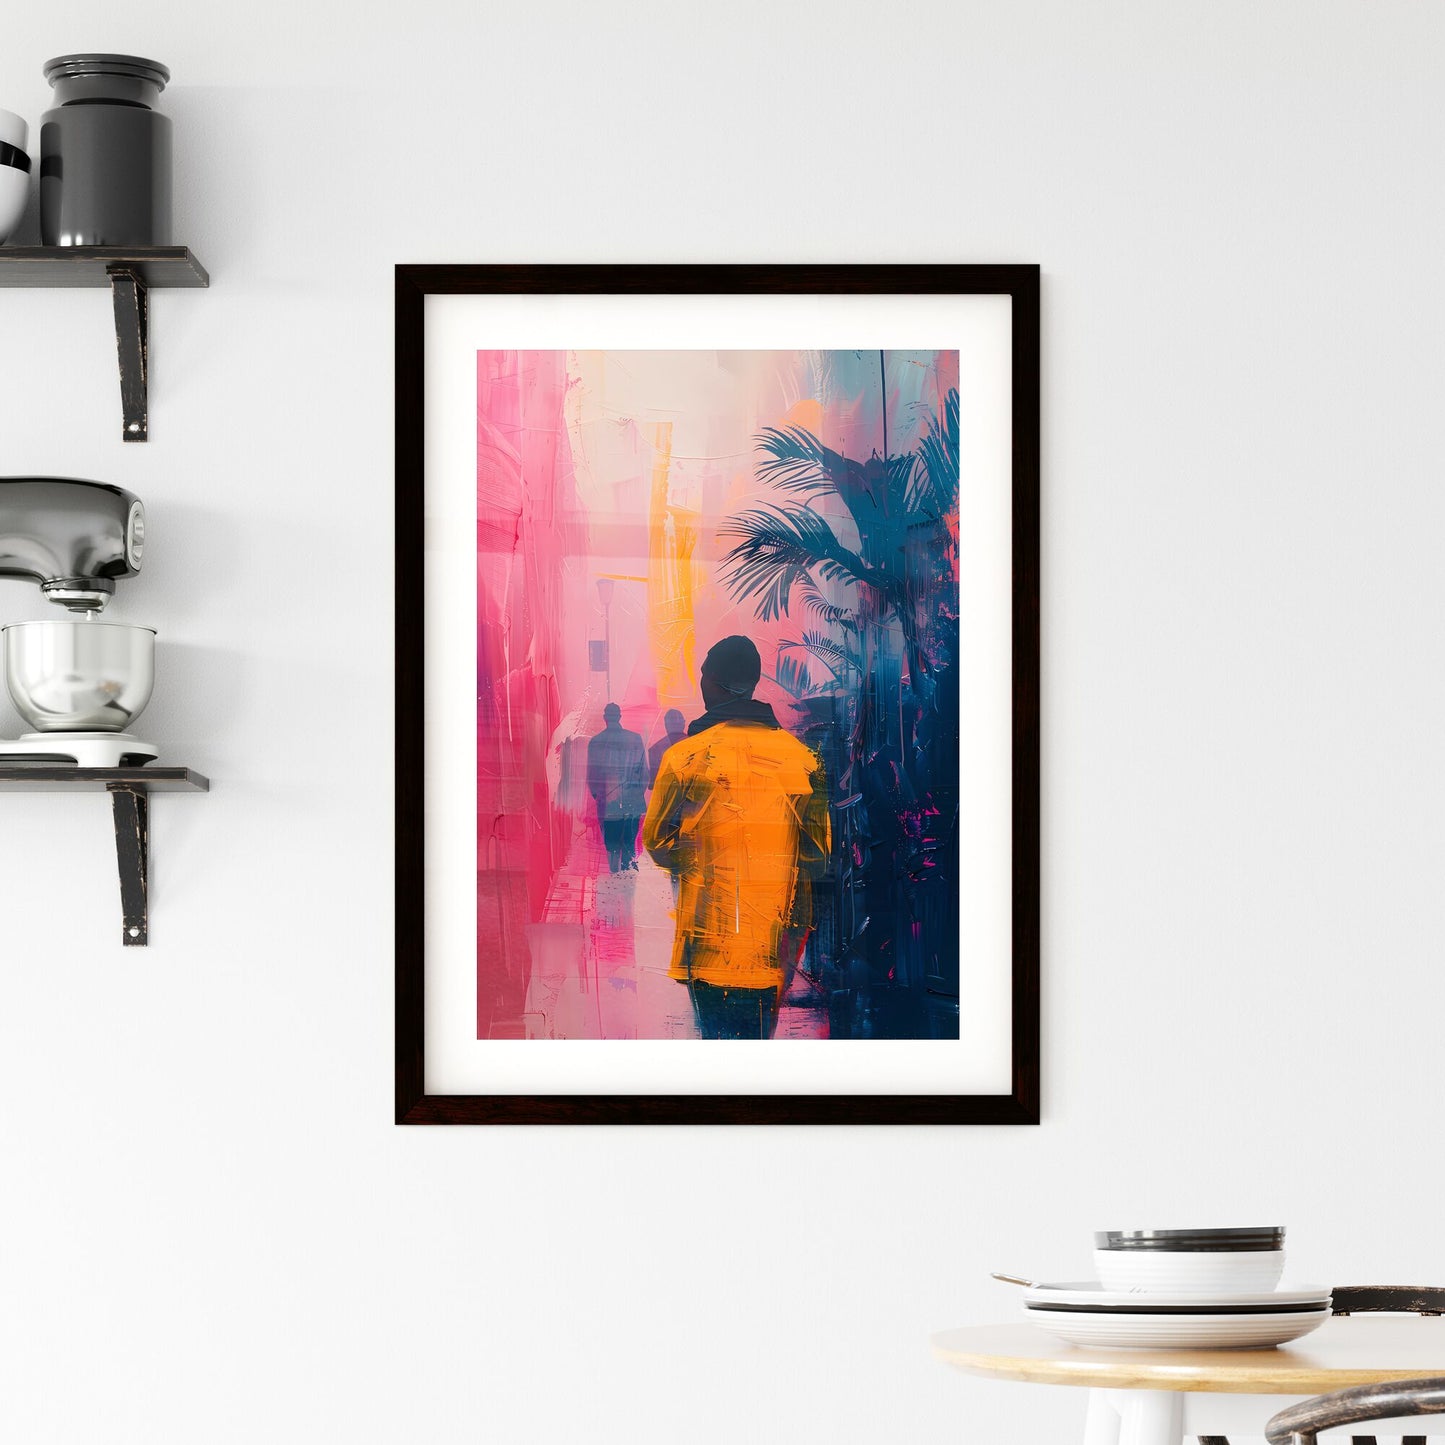 Abstract African Urban Art: Vibrant Pastel Painting Depicting Street Scene with Palm Trees and Figures Default Title